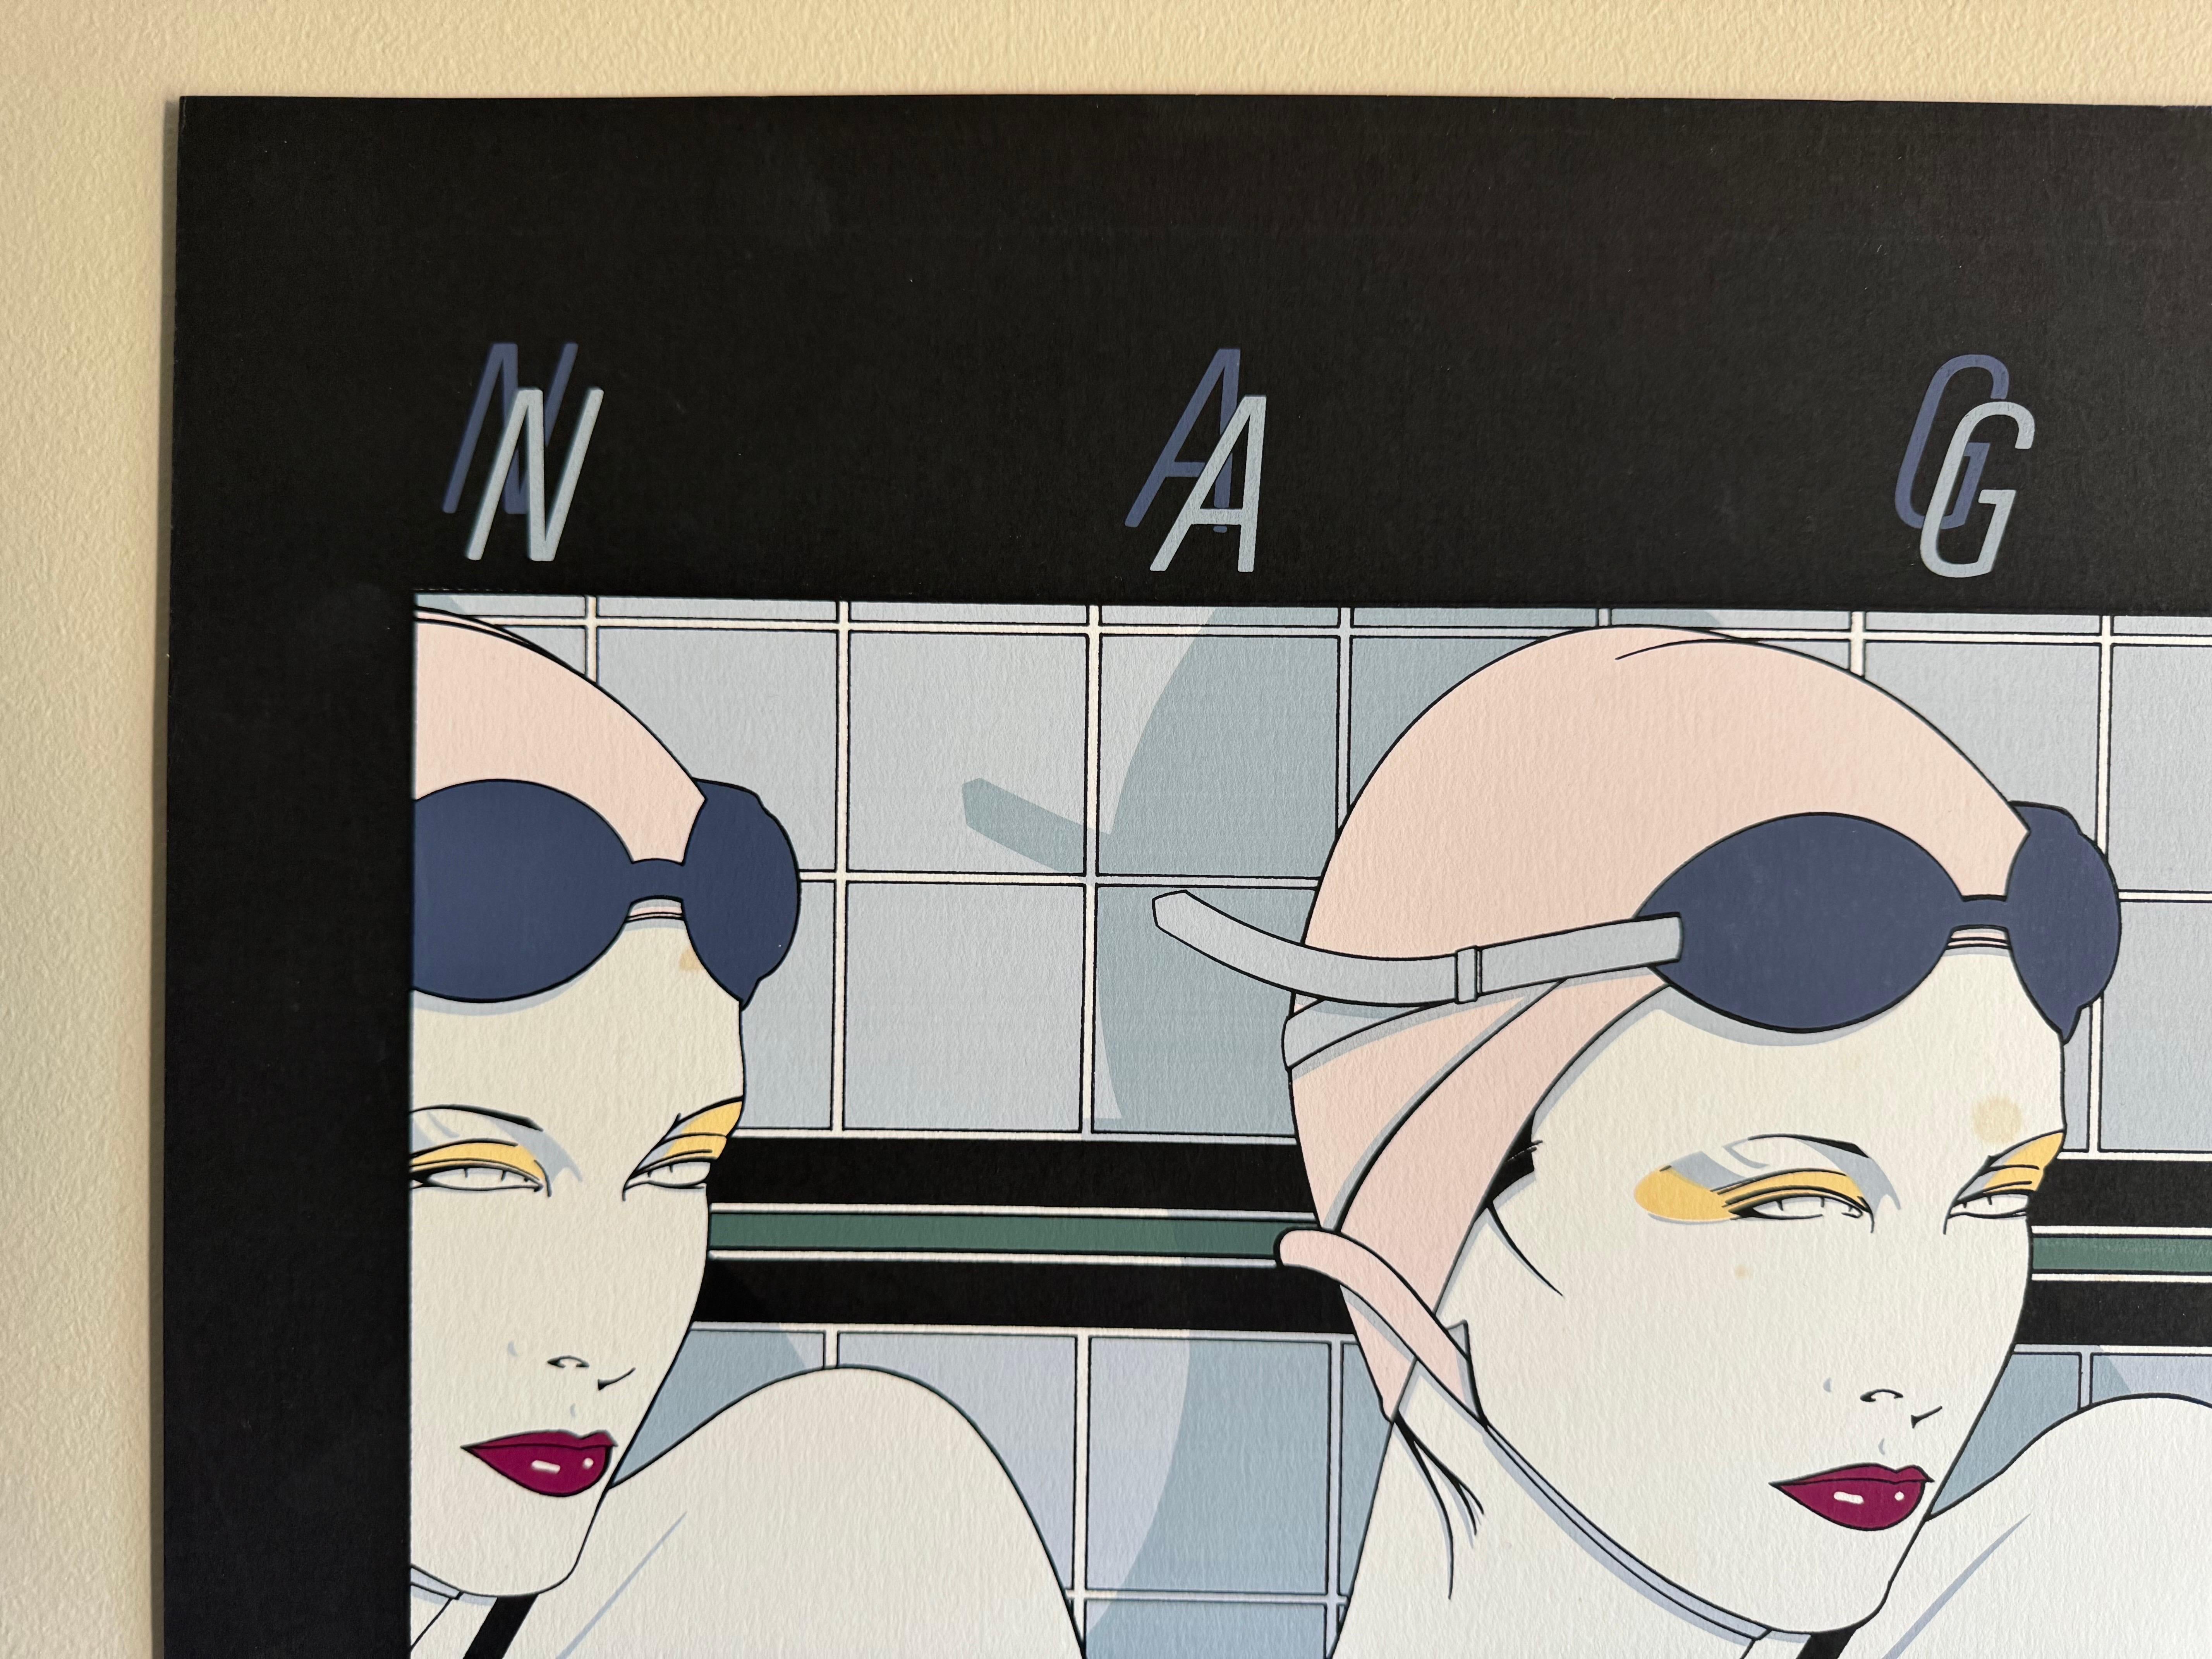 Beautiful serigraph by Patrick Nagel depicting 3 swimmers with swim cap and goggles. Printed on heavy stock in 1979 by Mirage editions in Santa Monica, California. This print is signed in plate by the artist.

Overall in excellent condition except